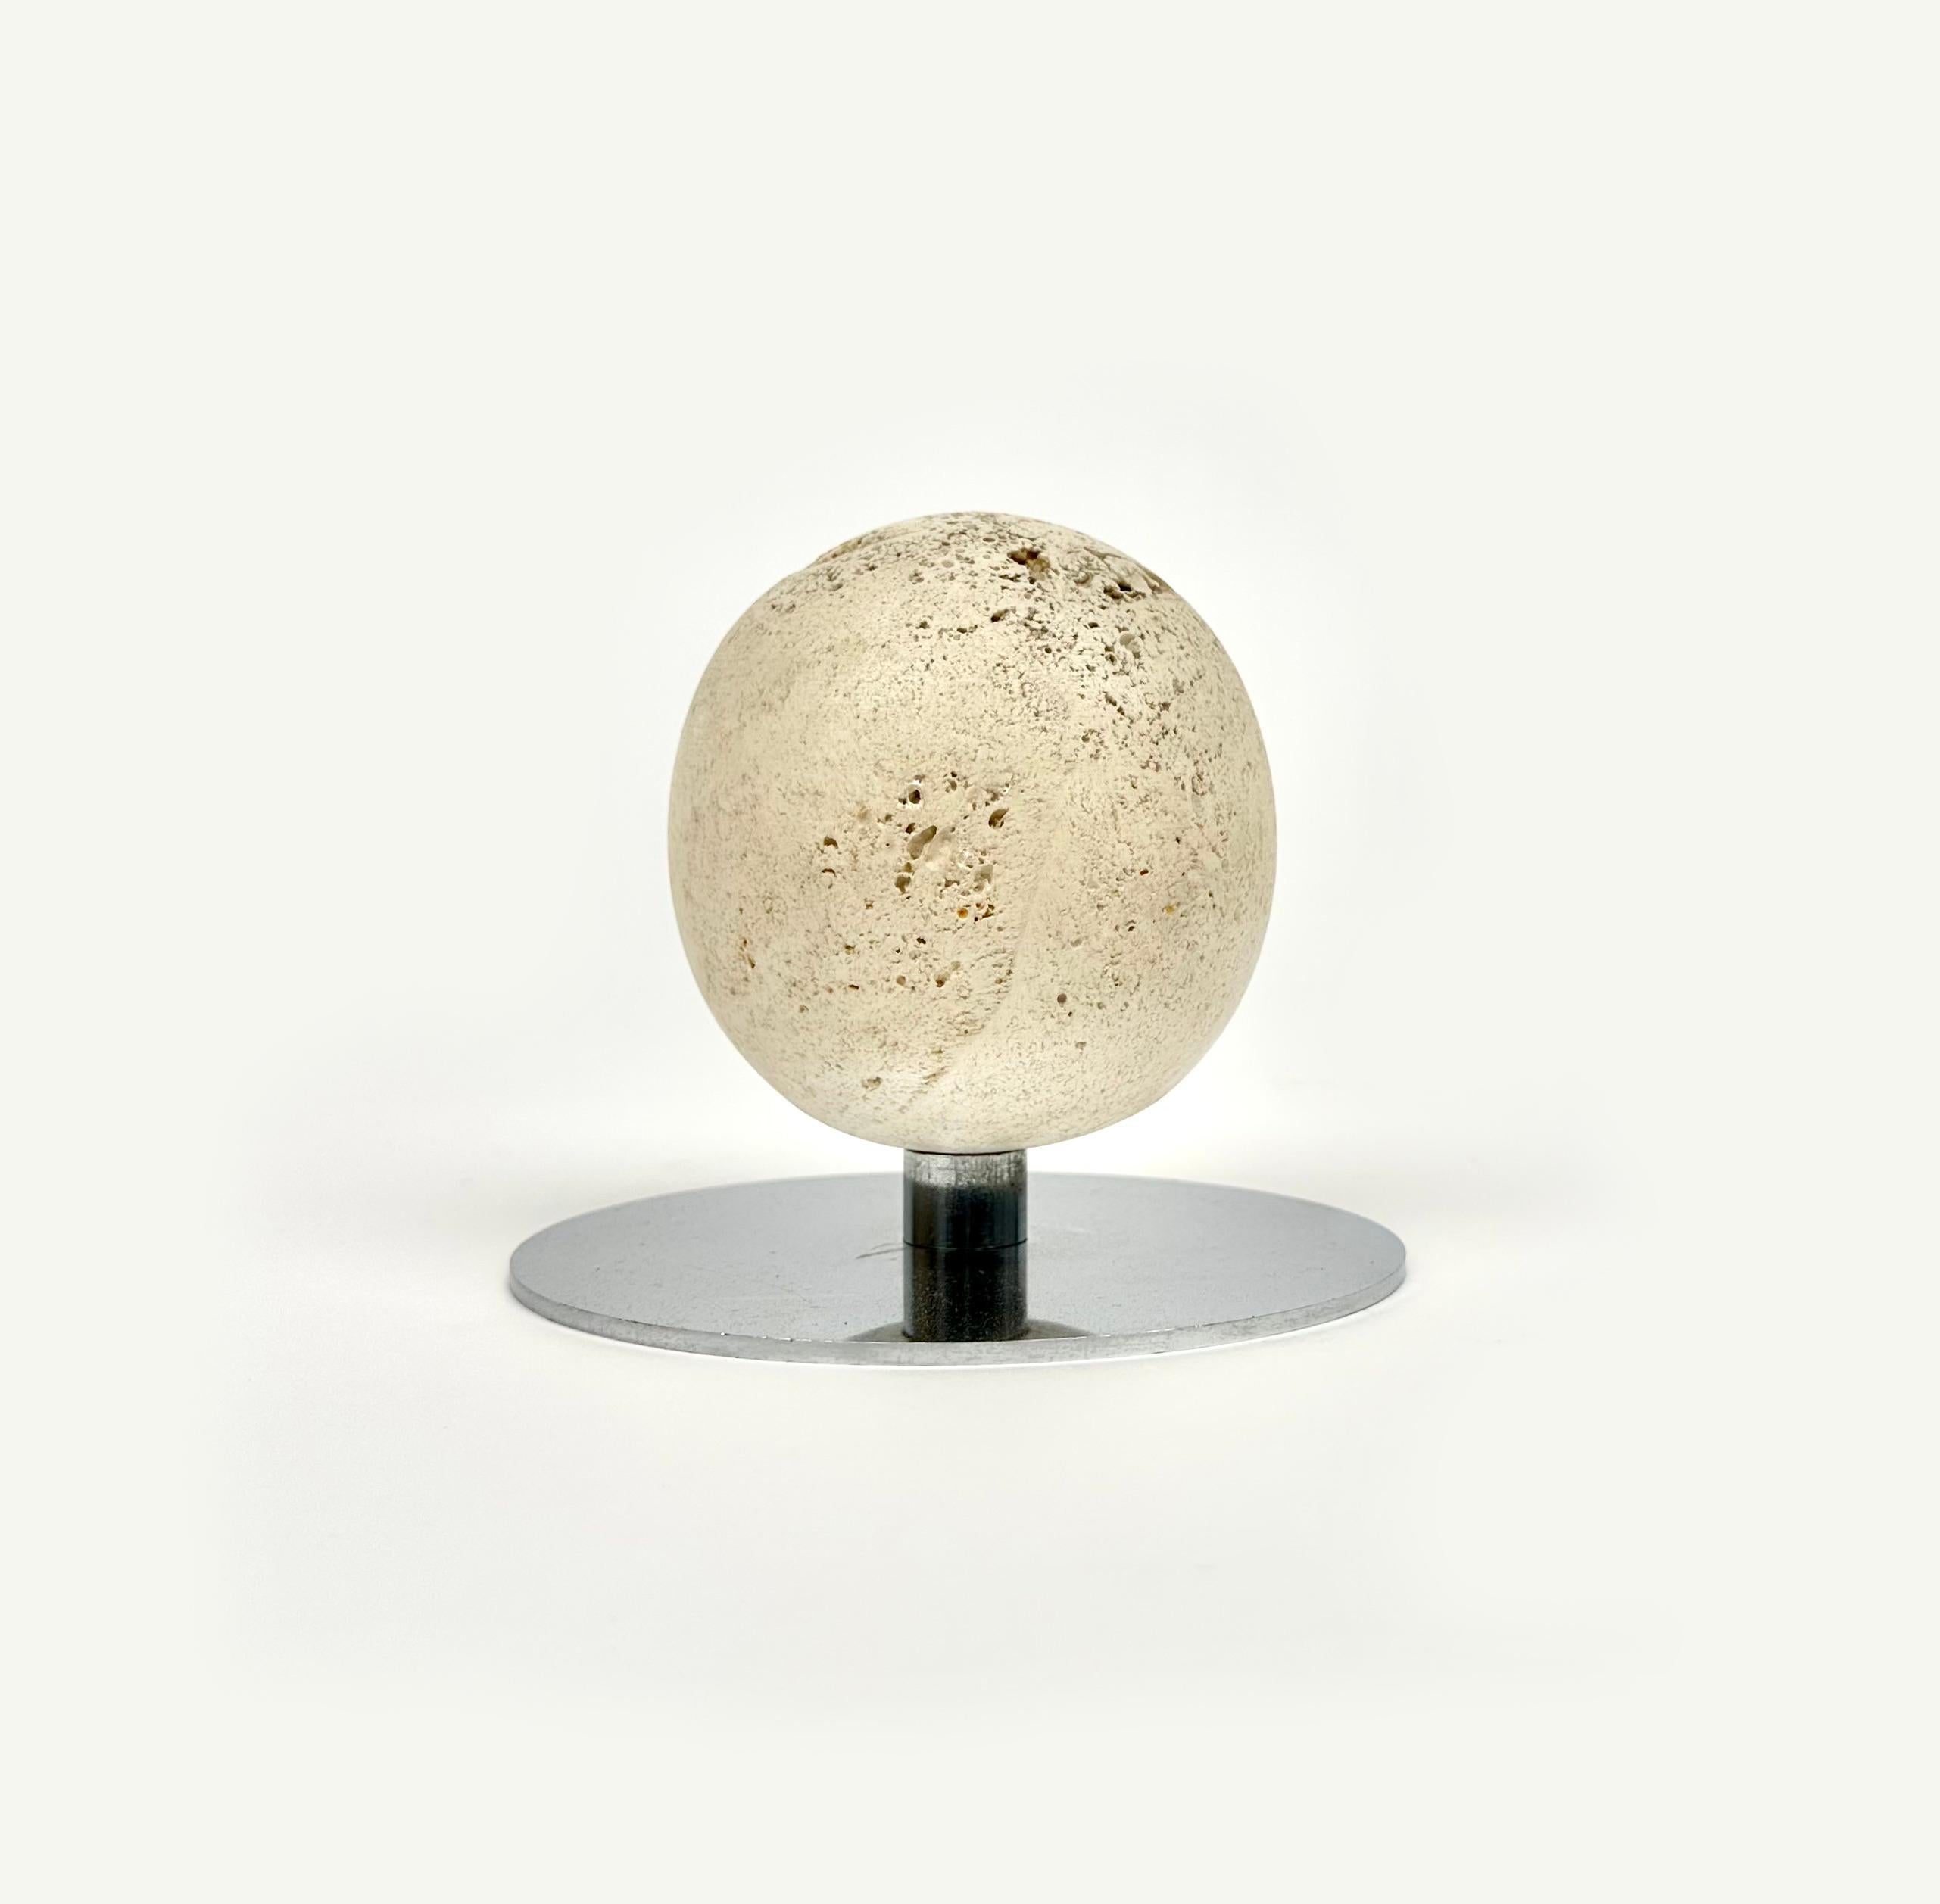 Midcentury sculpture / paperweight in steel and travertine in the shape of a ball in the style of Italian designer Enzo Mari.

Made in Italy in the 1970s.